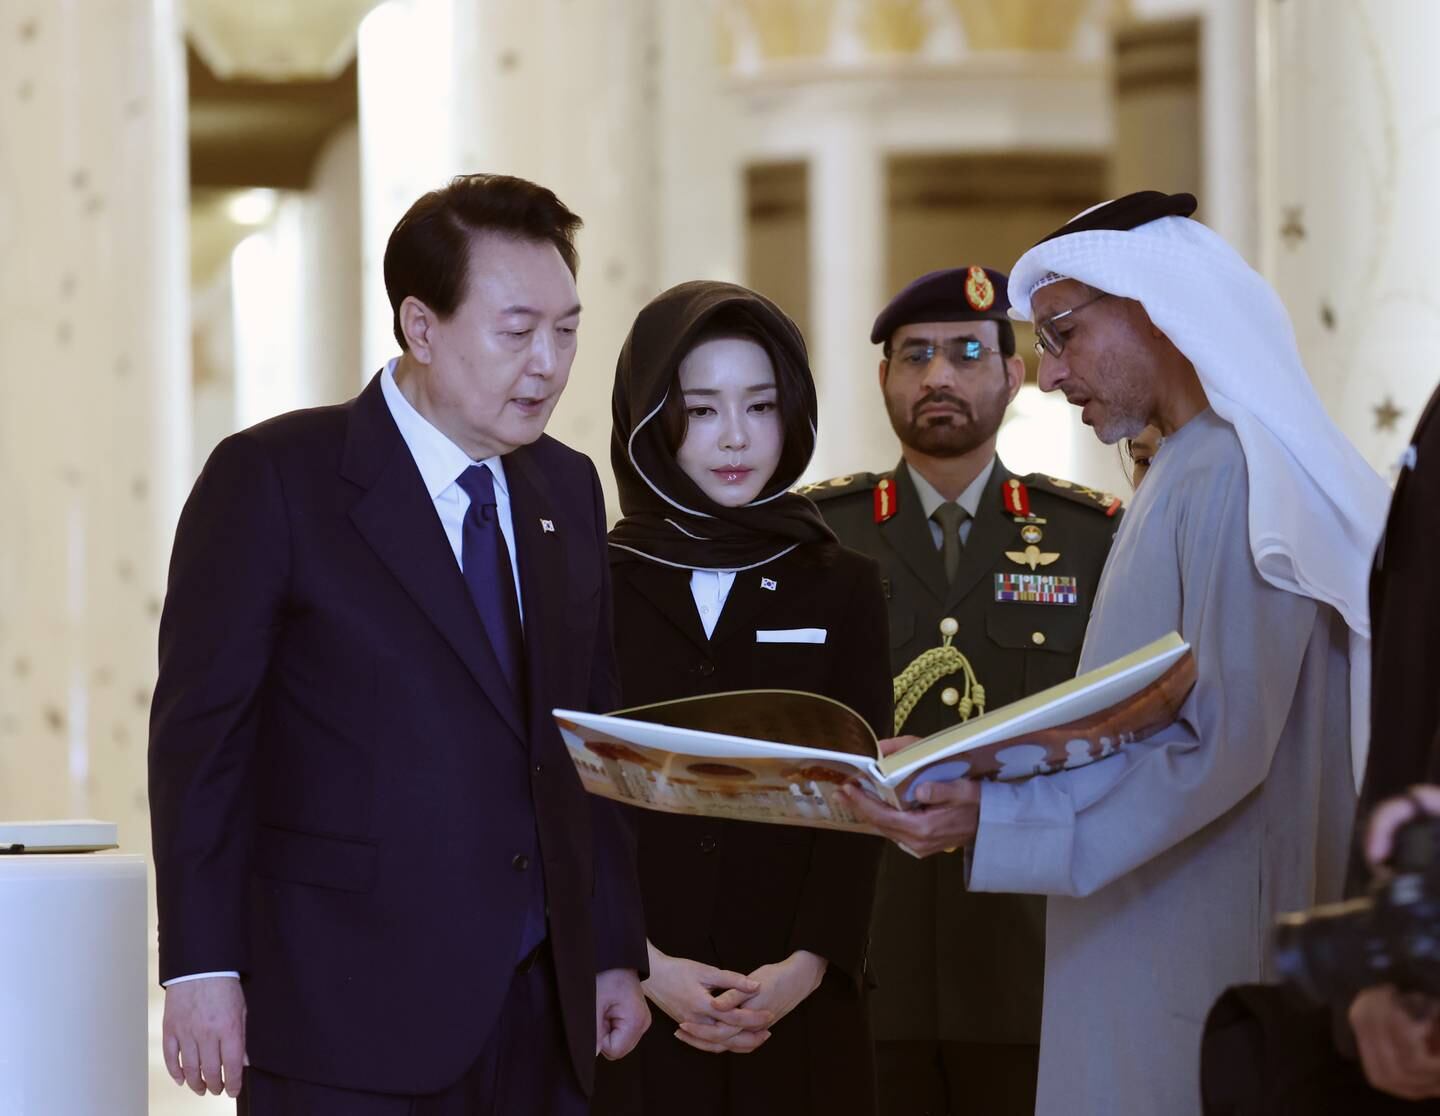 South Korean President Yoon Suk Yeol and first lady Kim Keon Hee tour the Sheikh Zayed Grand Mosque in Abu Dhabi. EPA